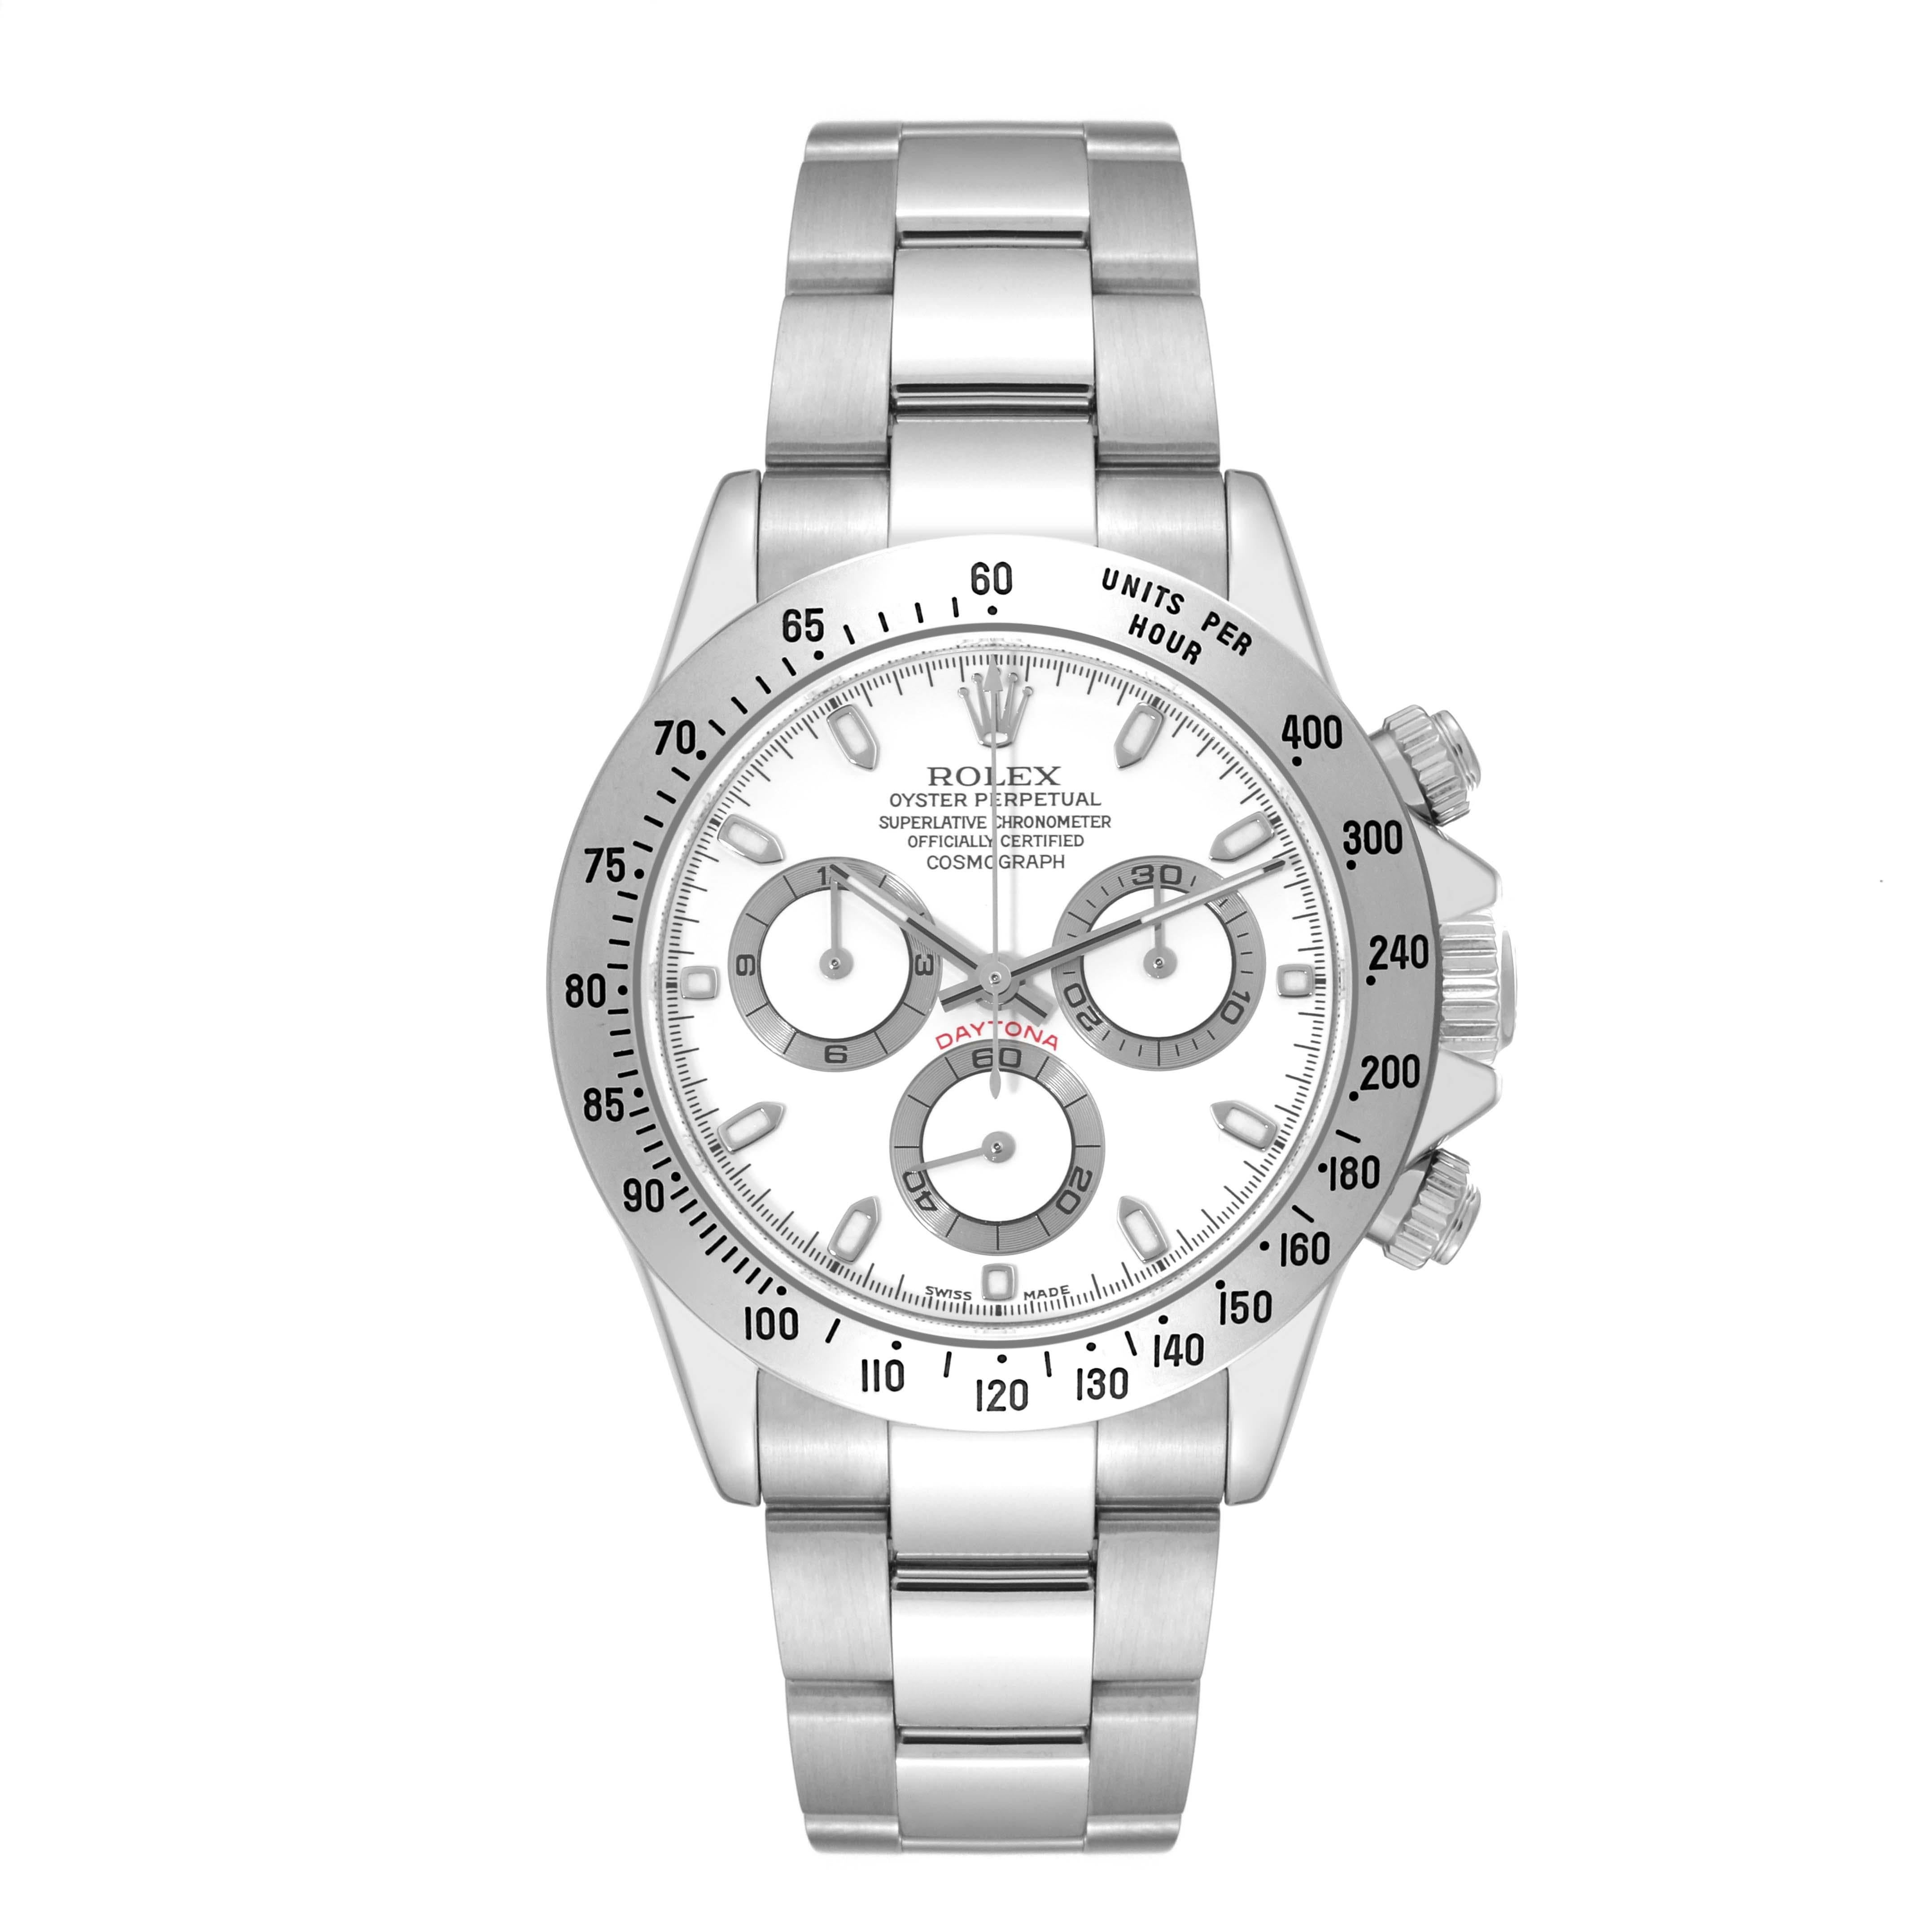 Rolex Daytona White Dial Chronograph Steel Mens Watch 116520 Box Papers For Sale 5